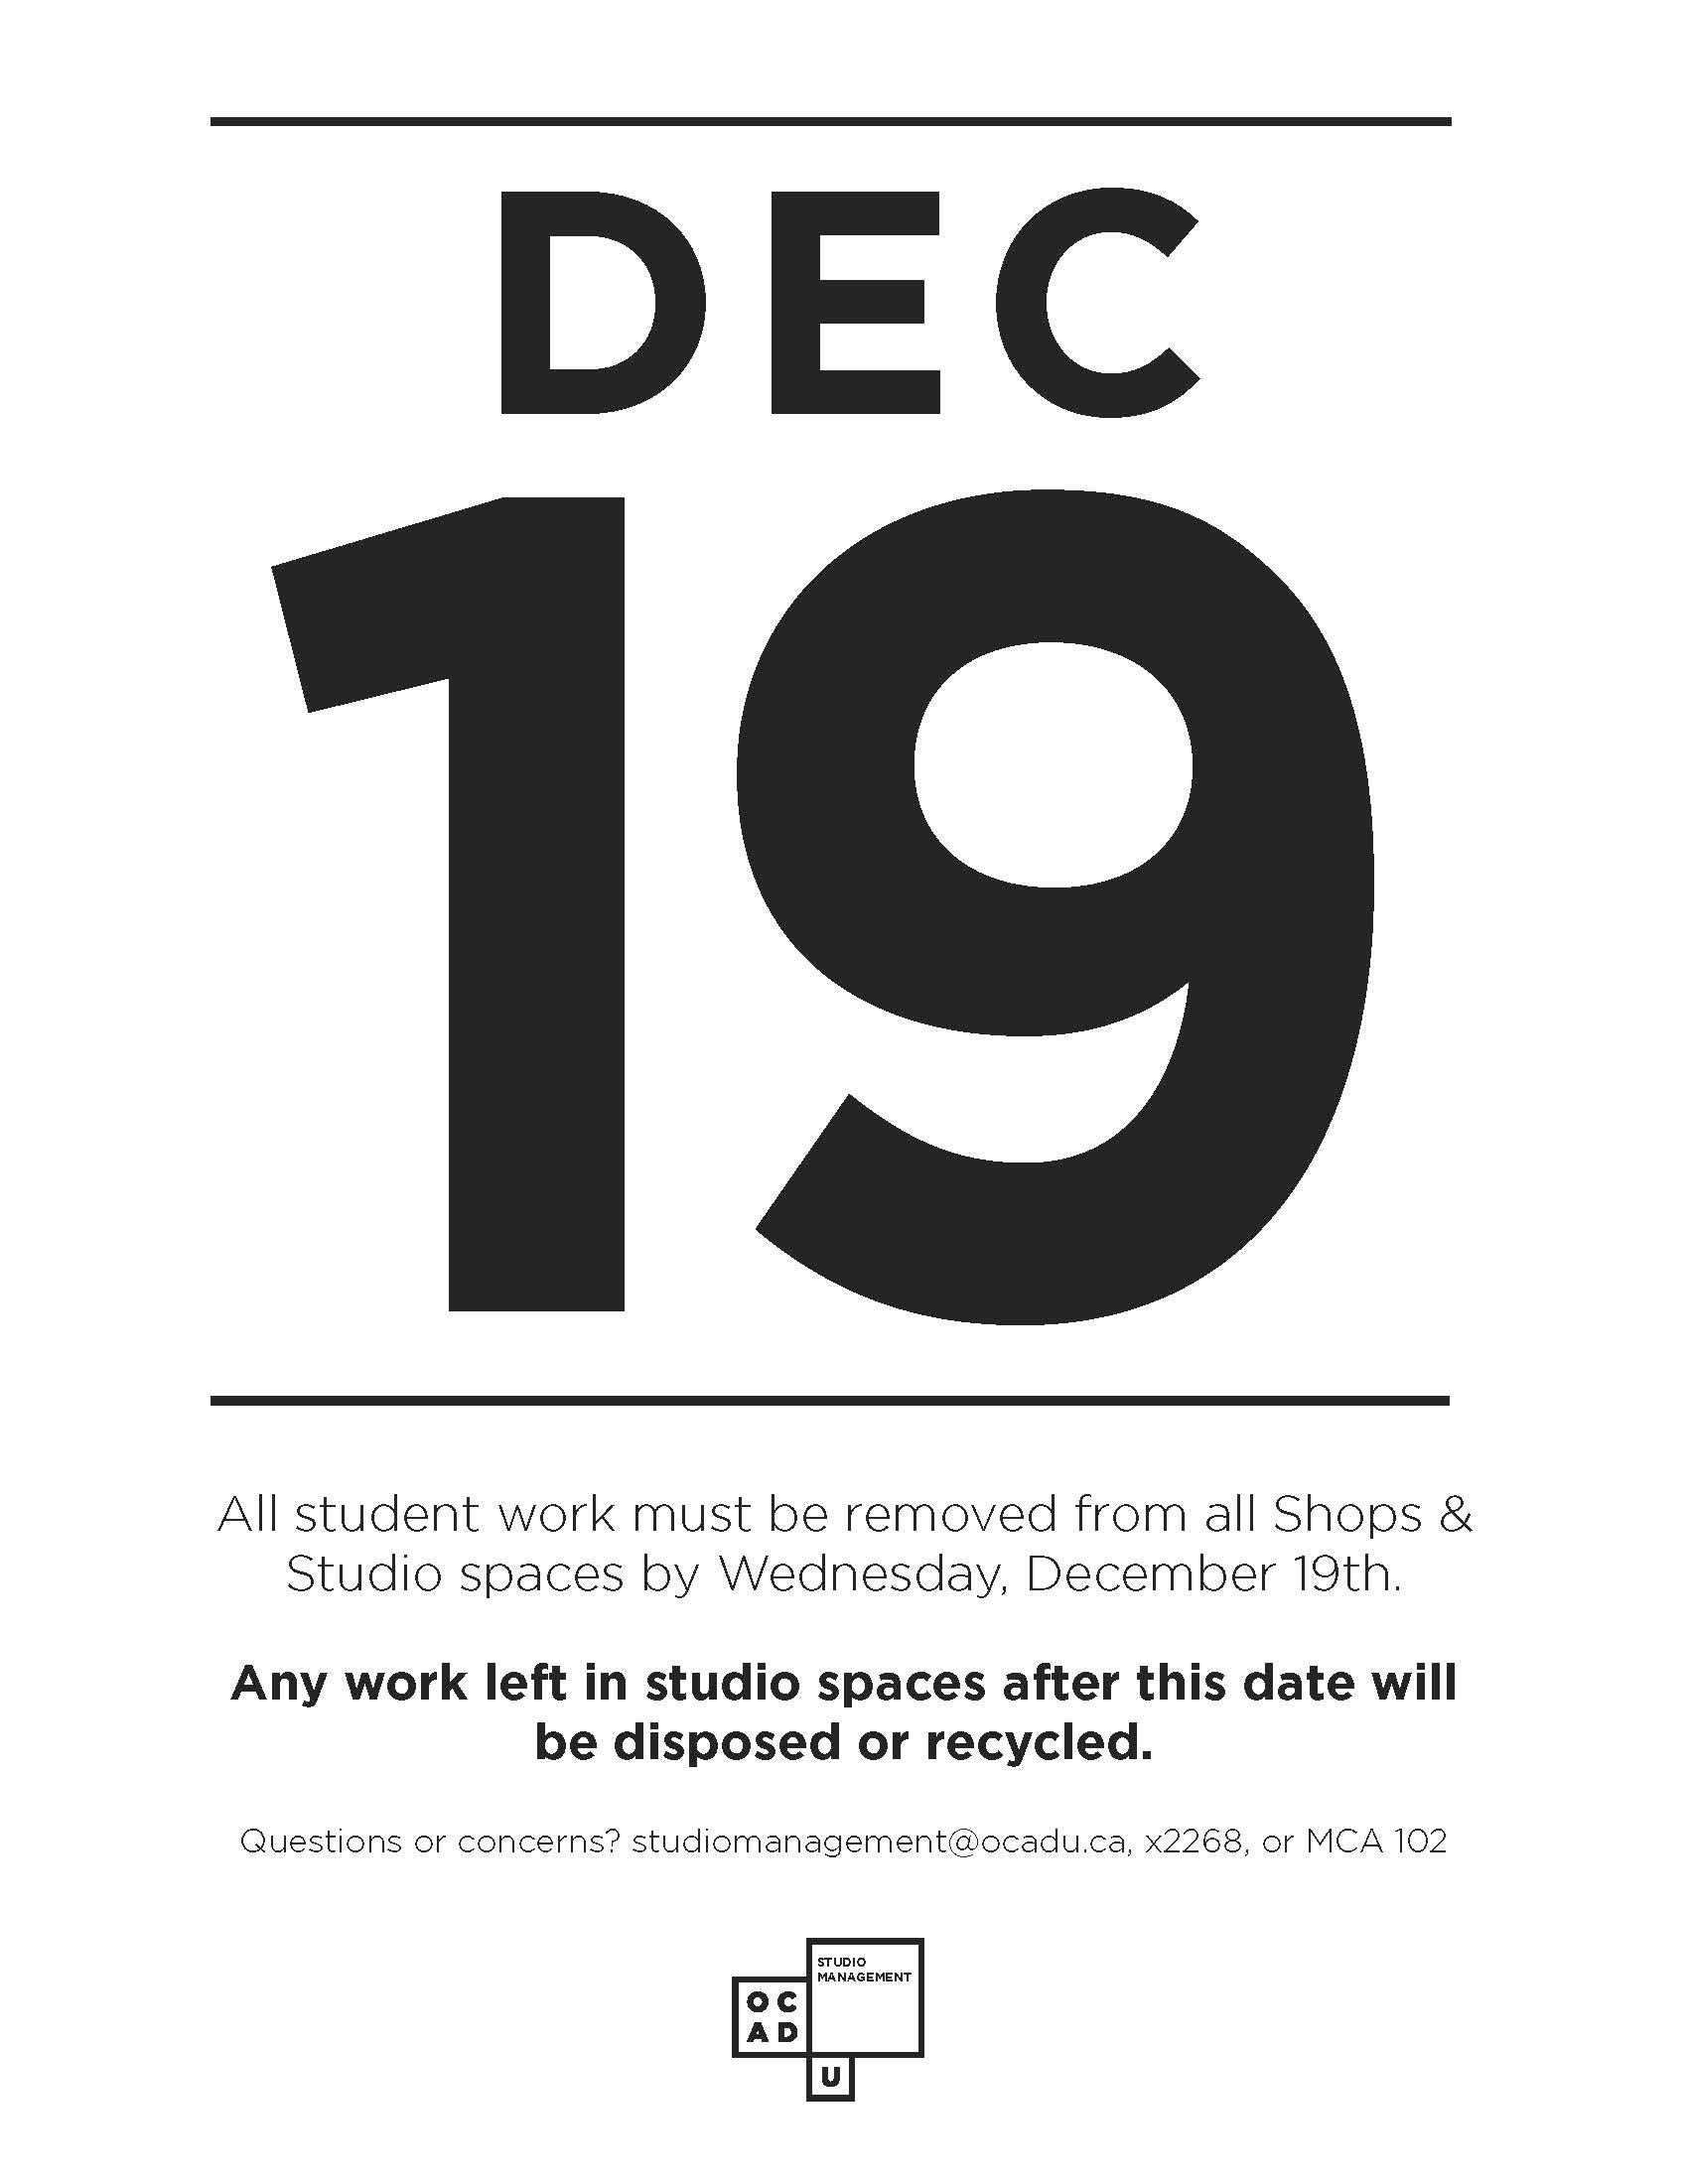 Students remove your work by December 19